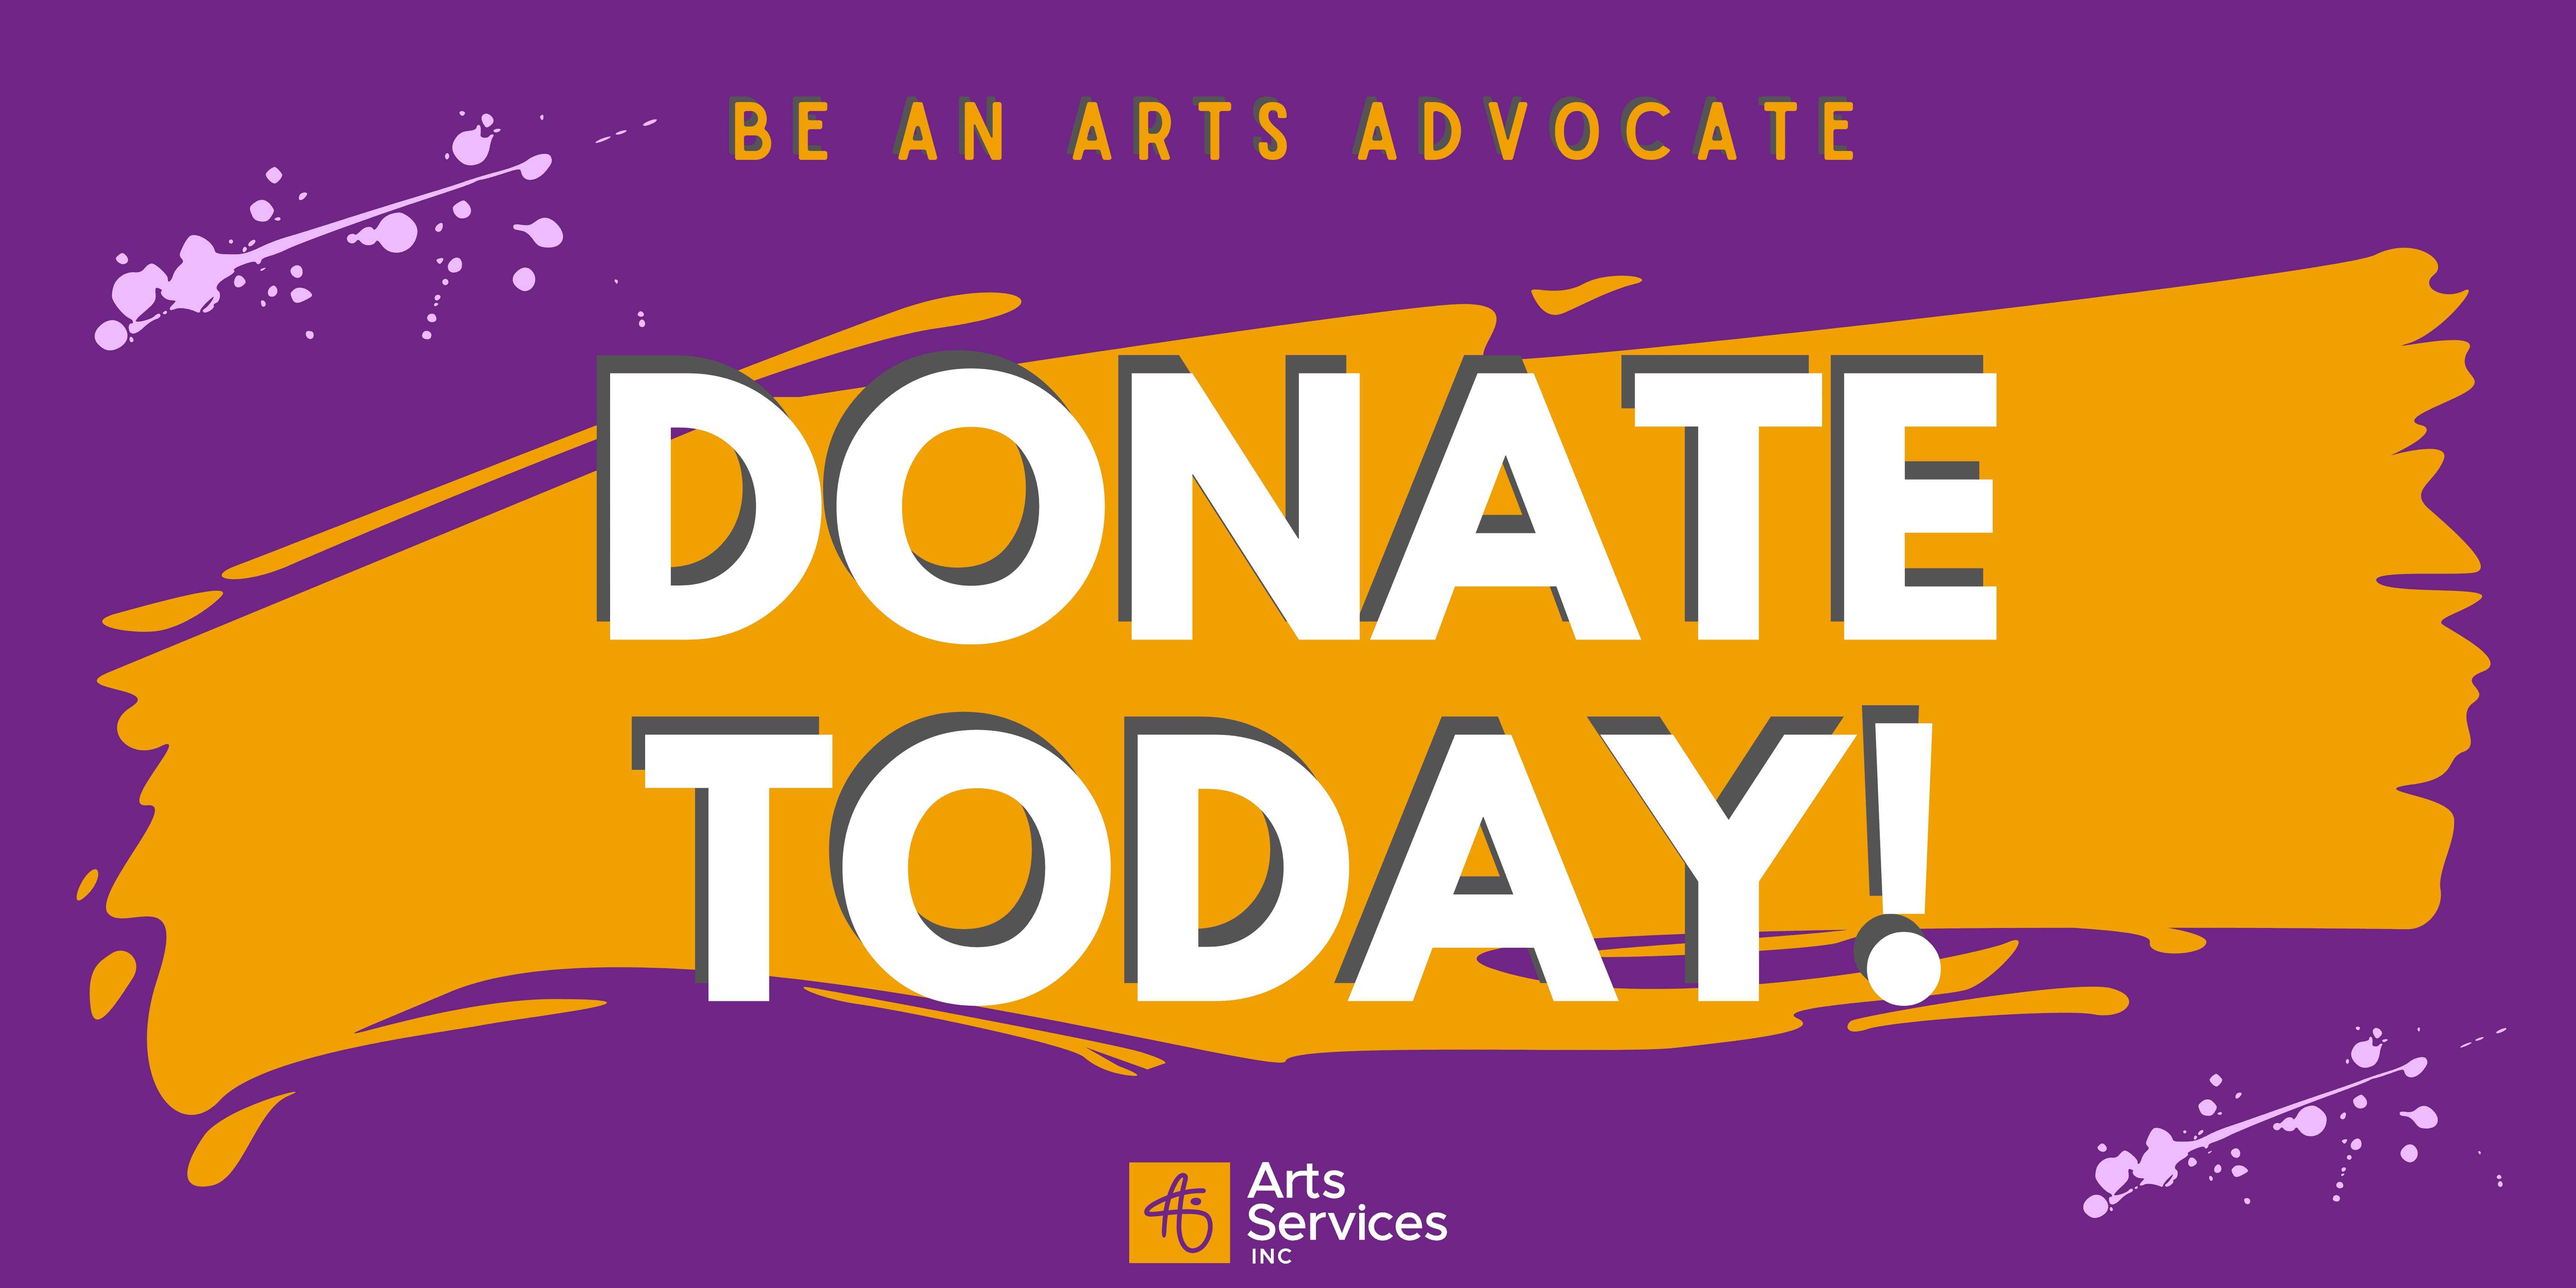 Donate_Today_Banner_to_advocate_for_the_arts